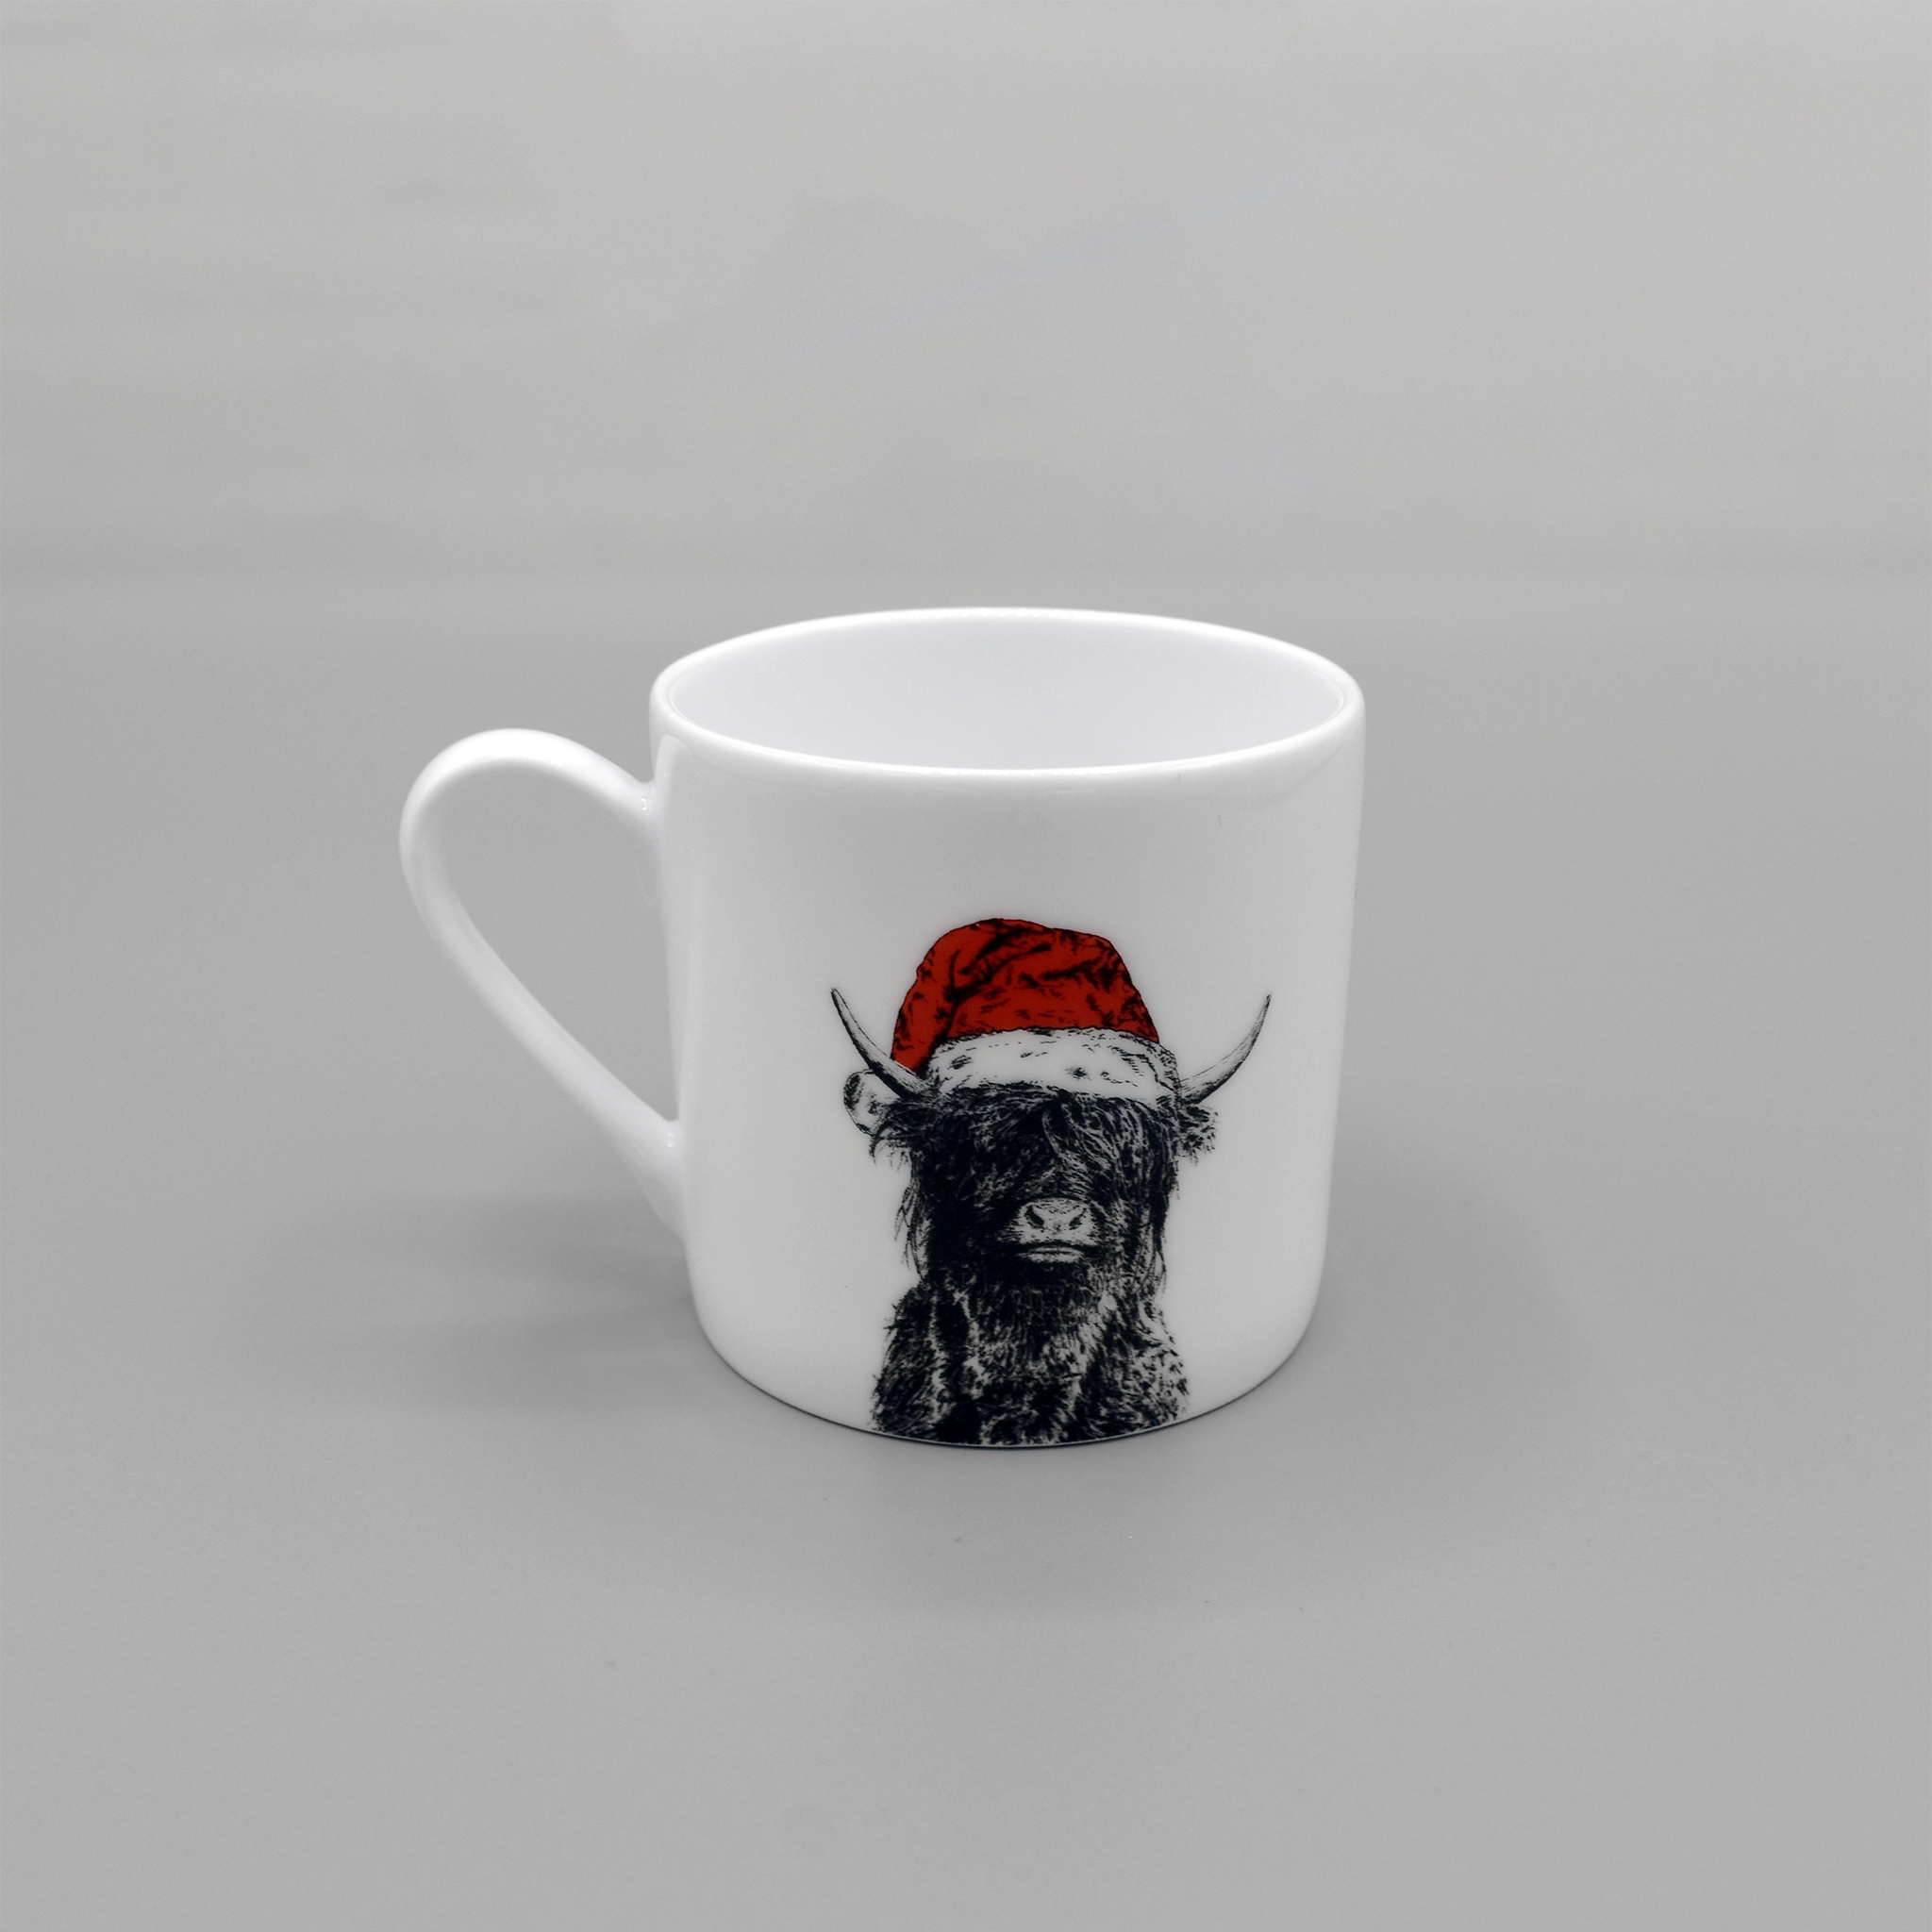 A white espresso mug featuring a printed image of a Highland cow wearing a red Santa hat